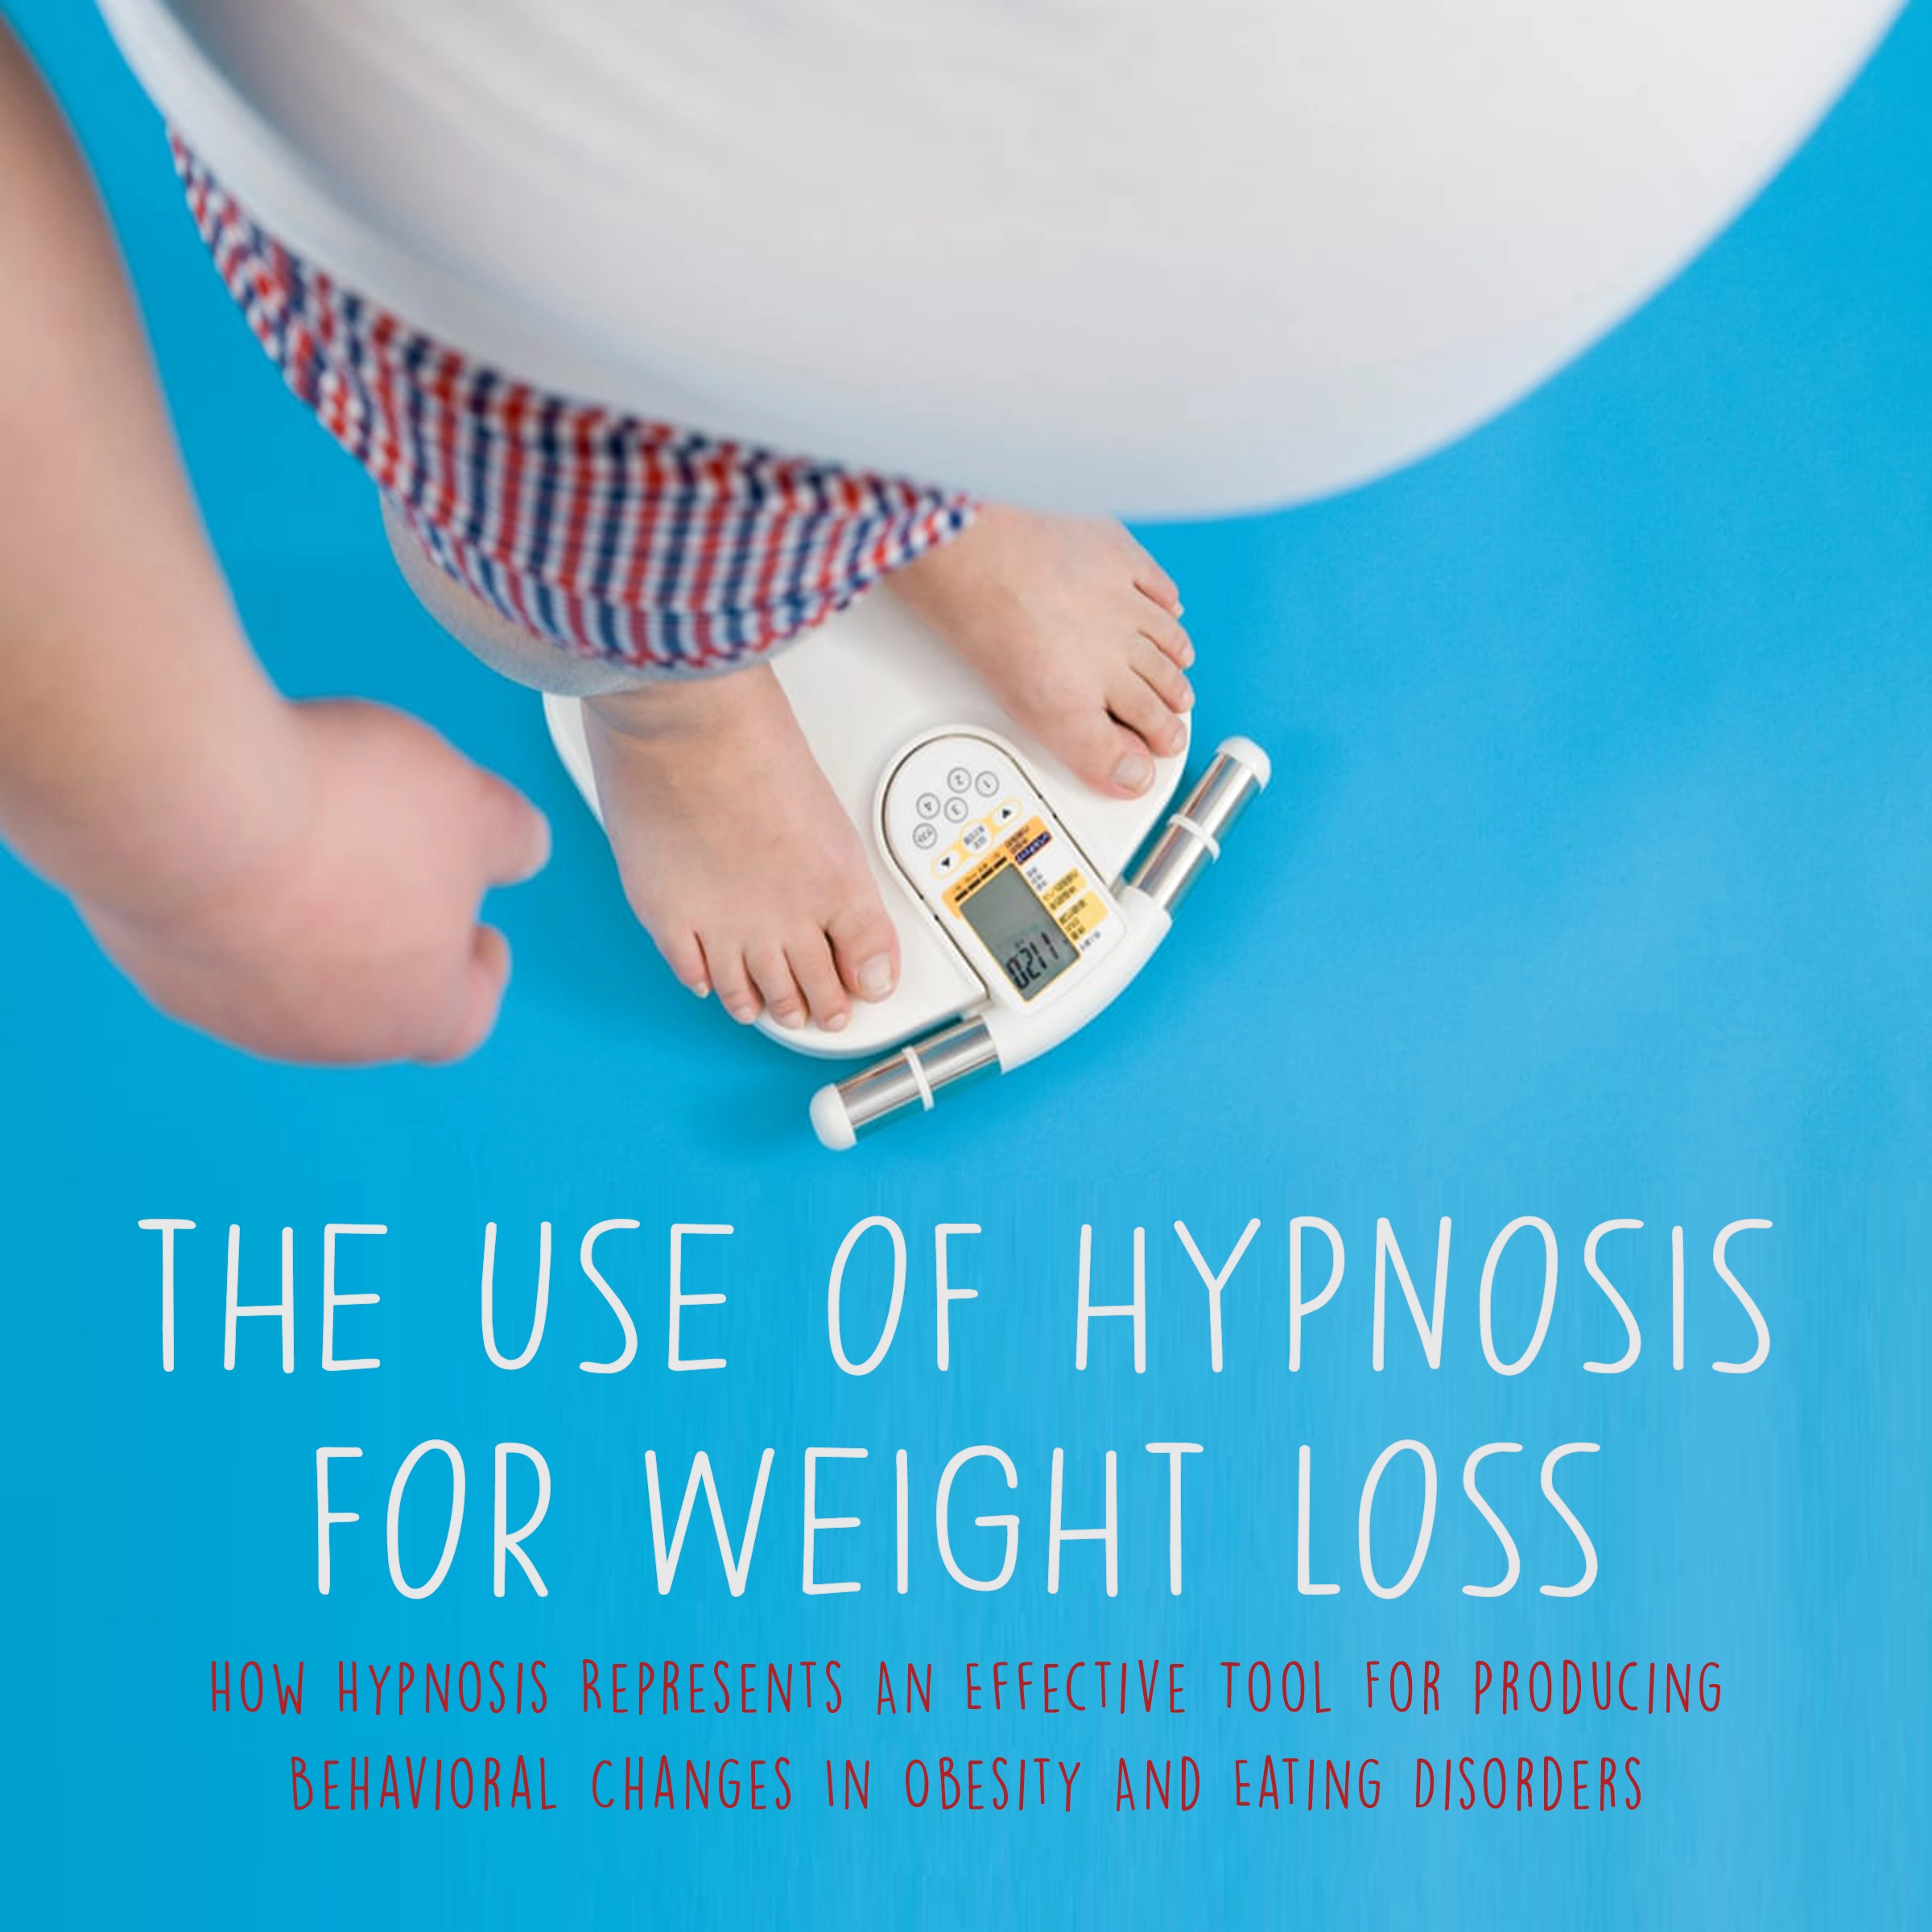 The Use of Hypnosis for Weight Loss Audiobook by Jim Colajuta